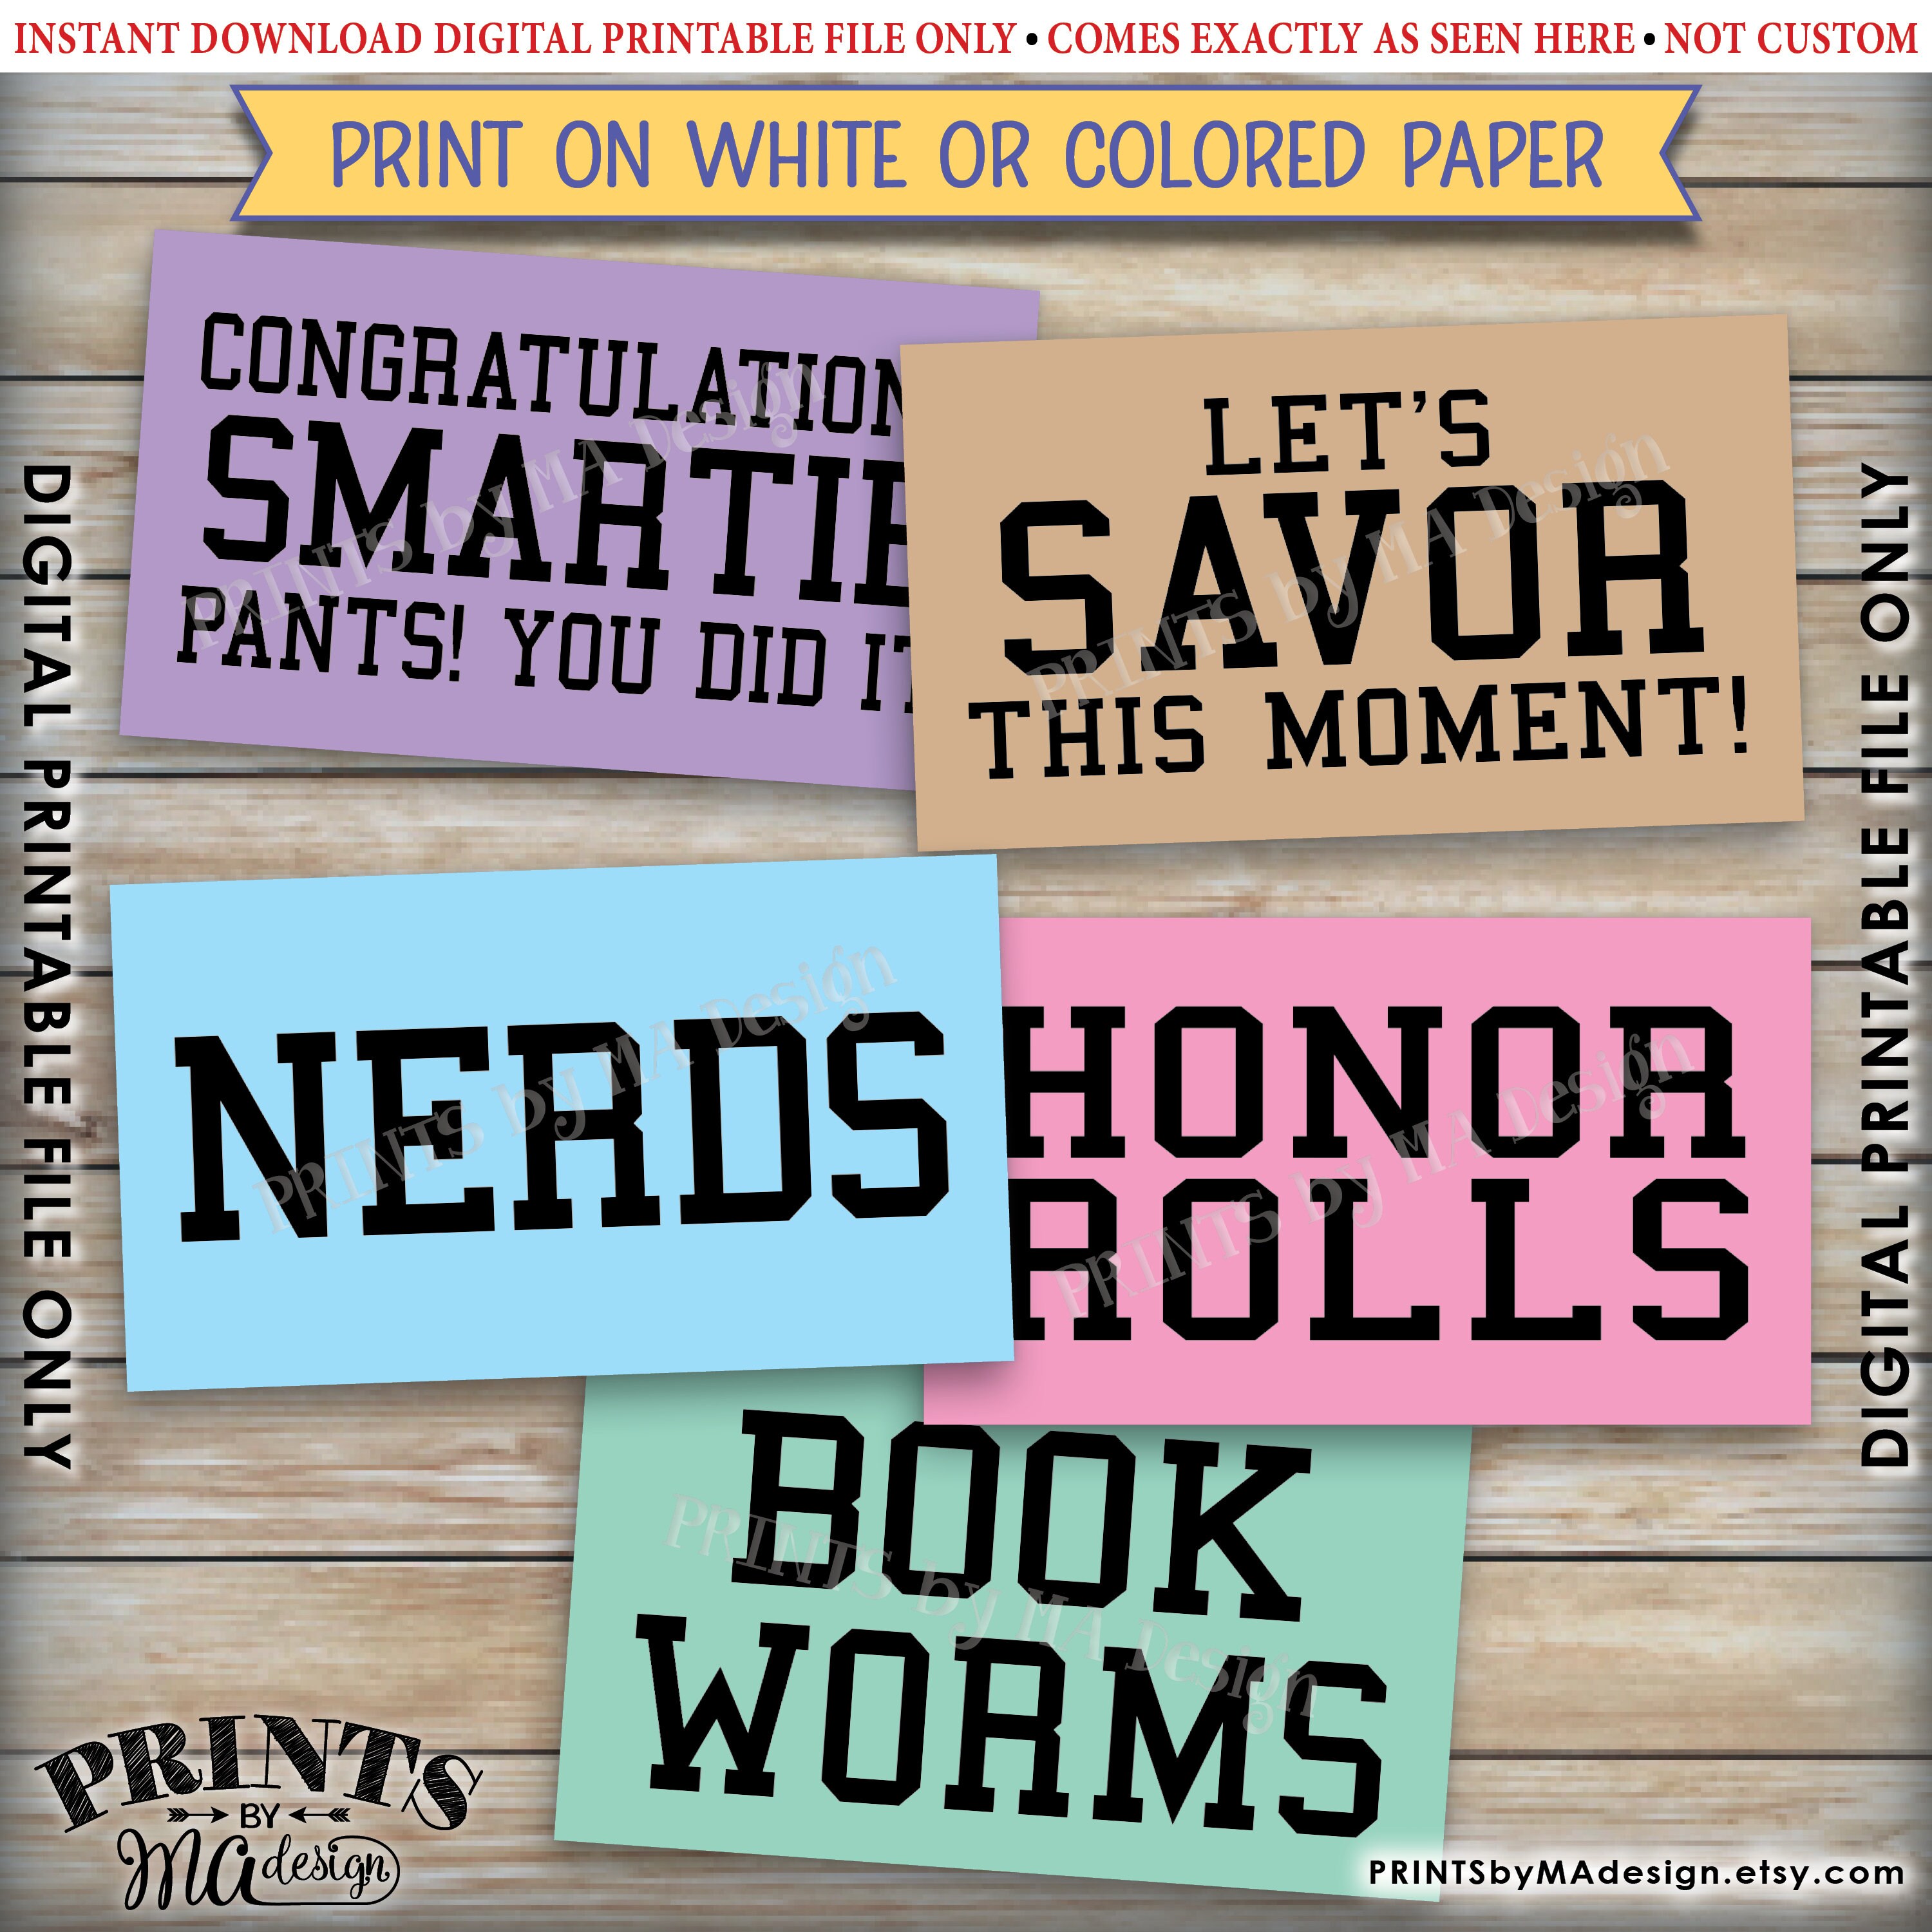 graduation-party-candy-signs-candy-bar-candy-buffet-smartie-cookie-class-ring-nerds-worms